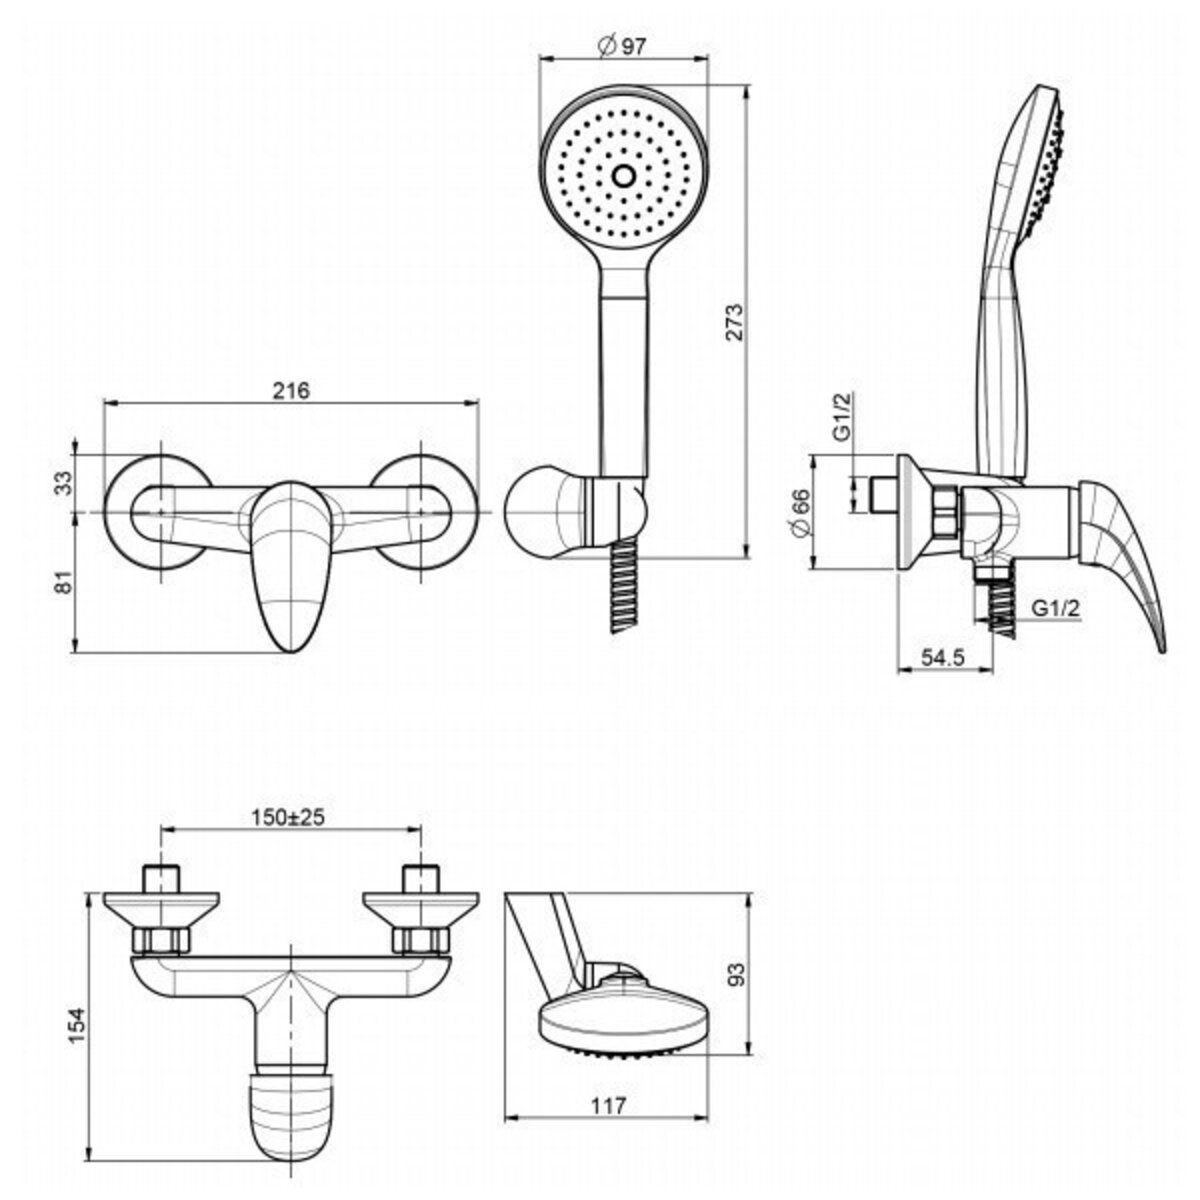 Fima Carlo Frattini series 18 external shower mixer without diverter with shower set